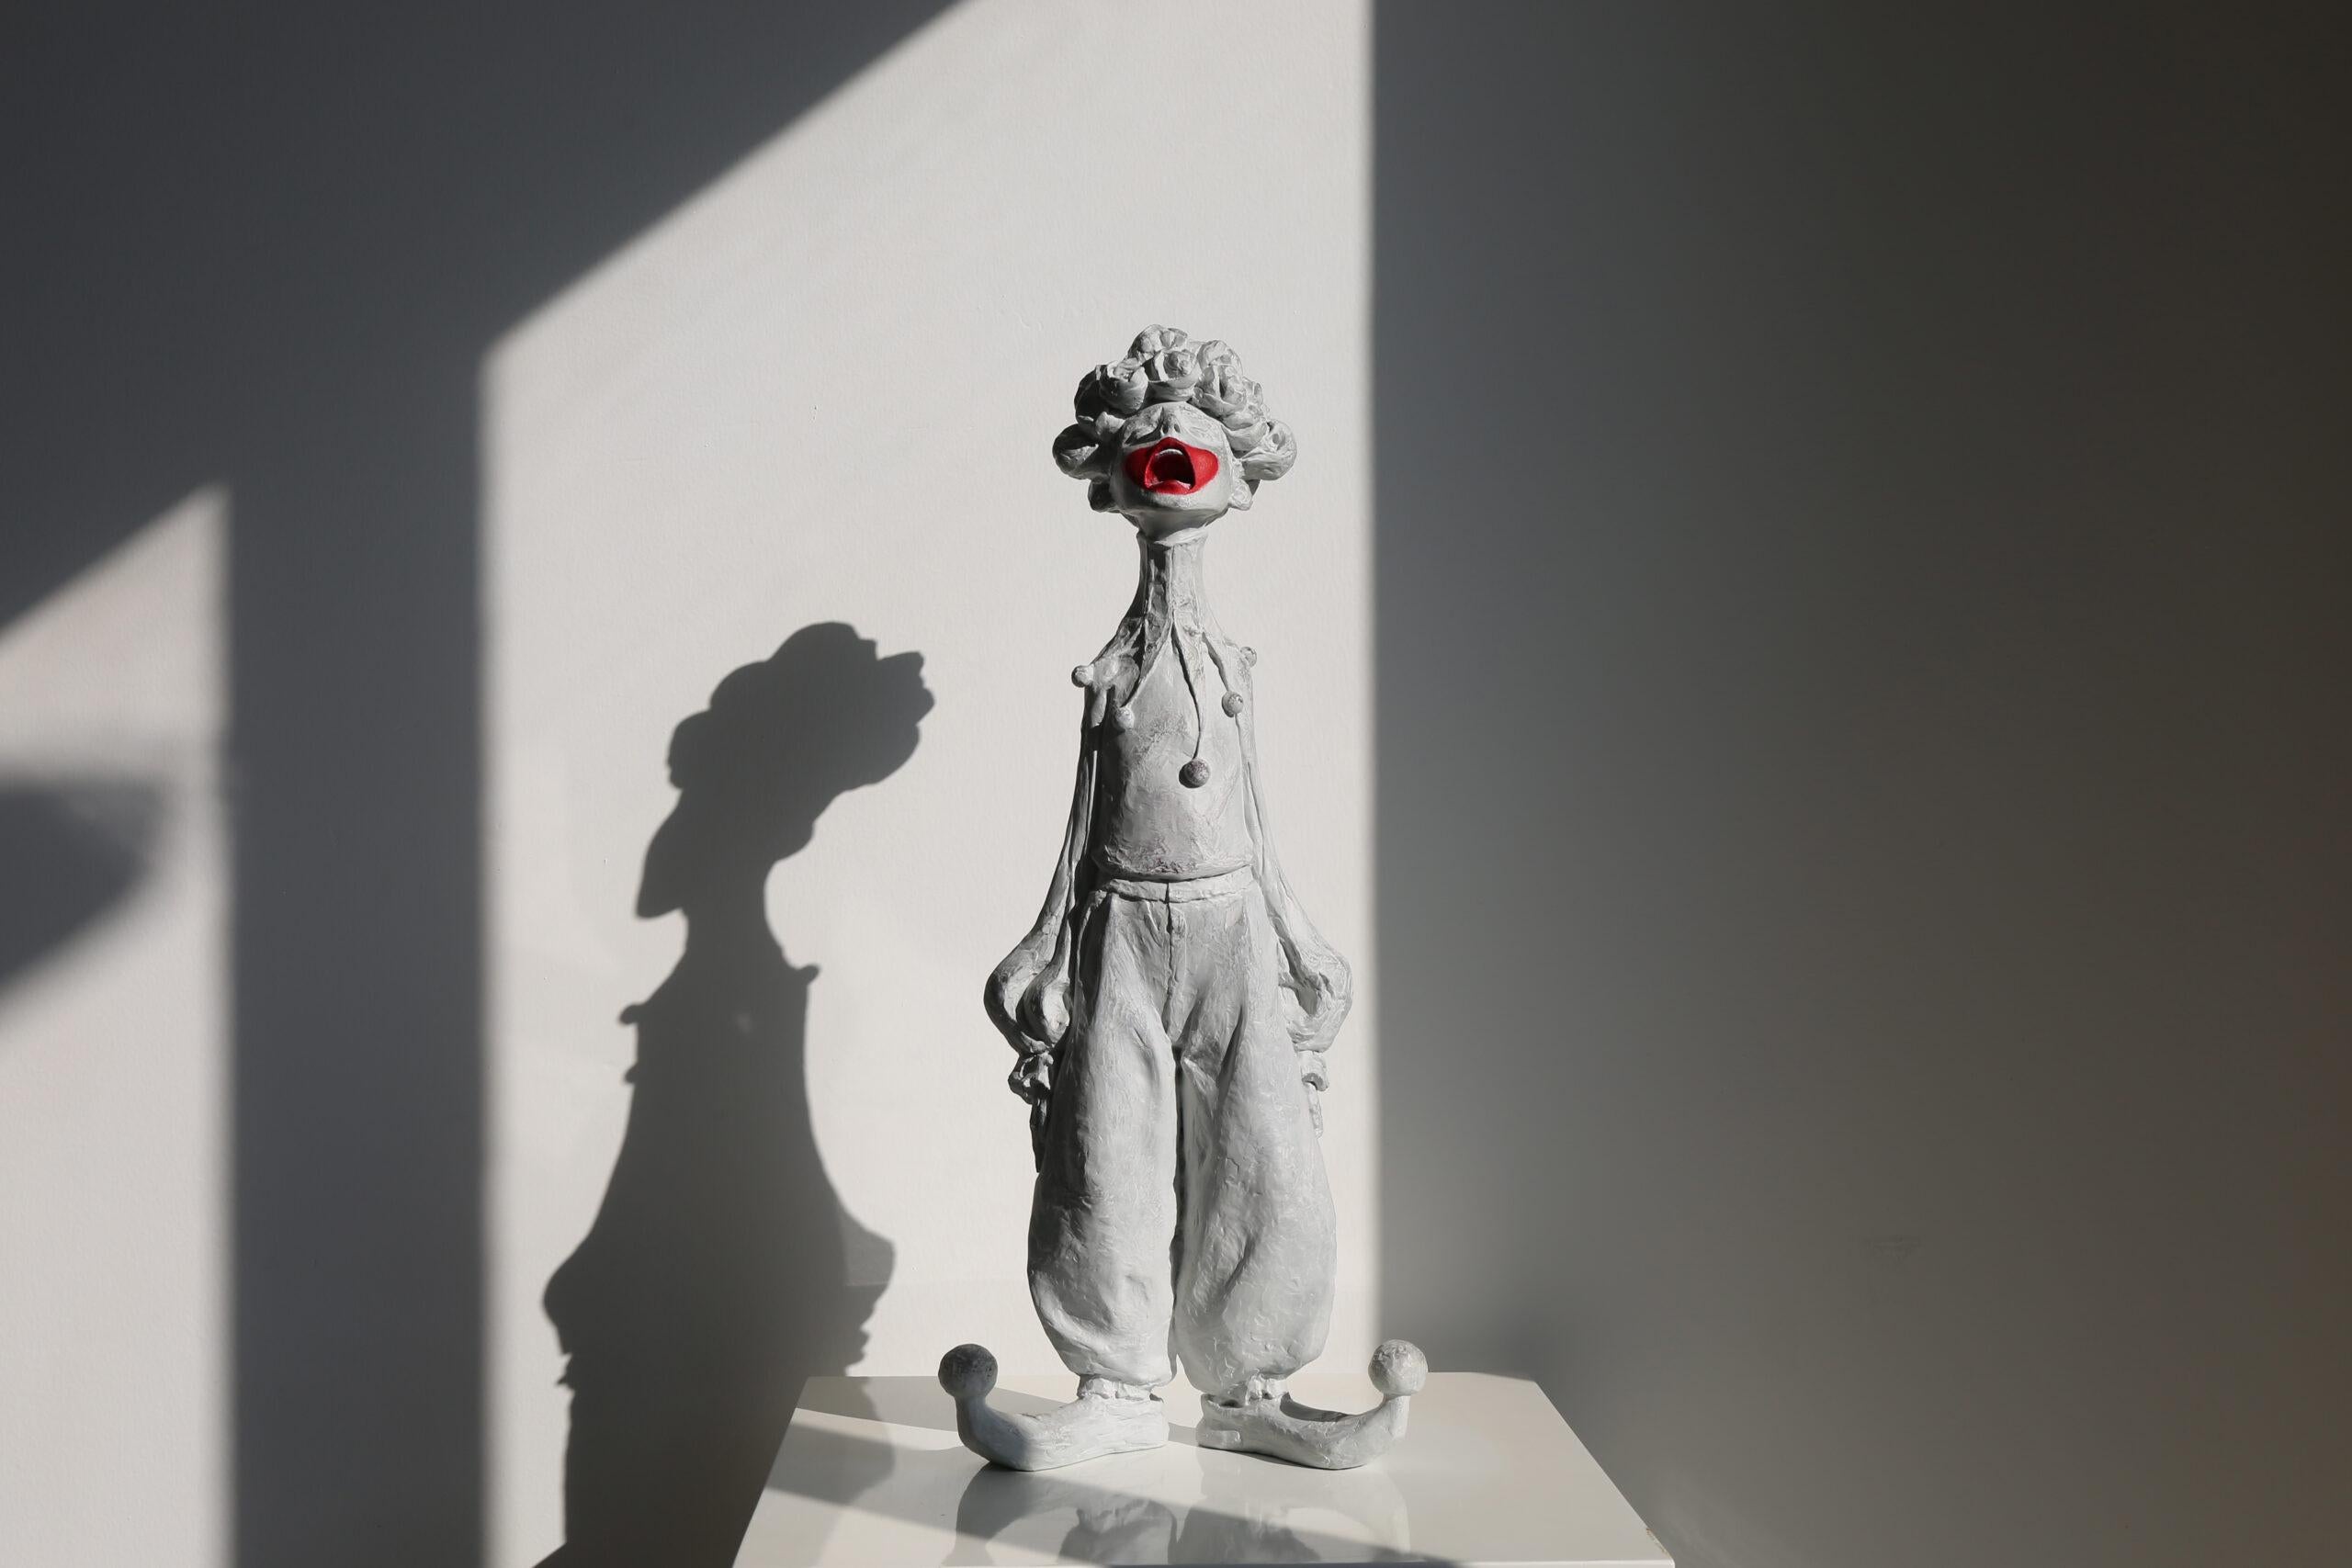 Grow up by Maizi - Sculpture by Unknown